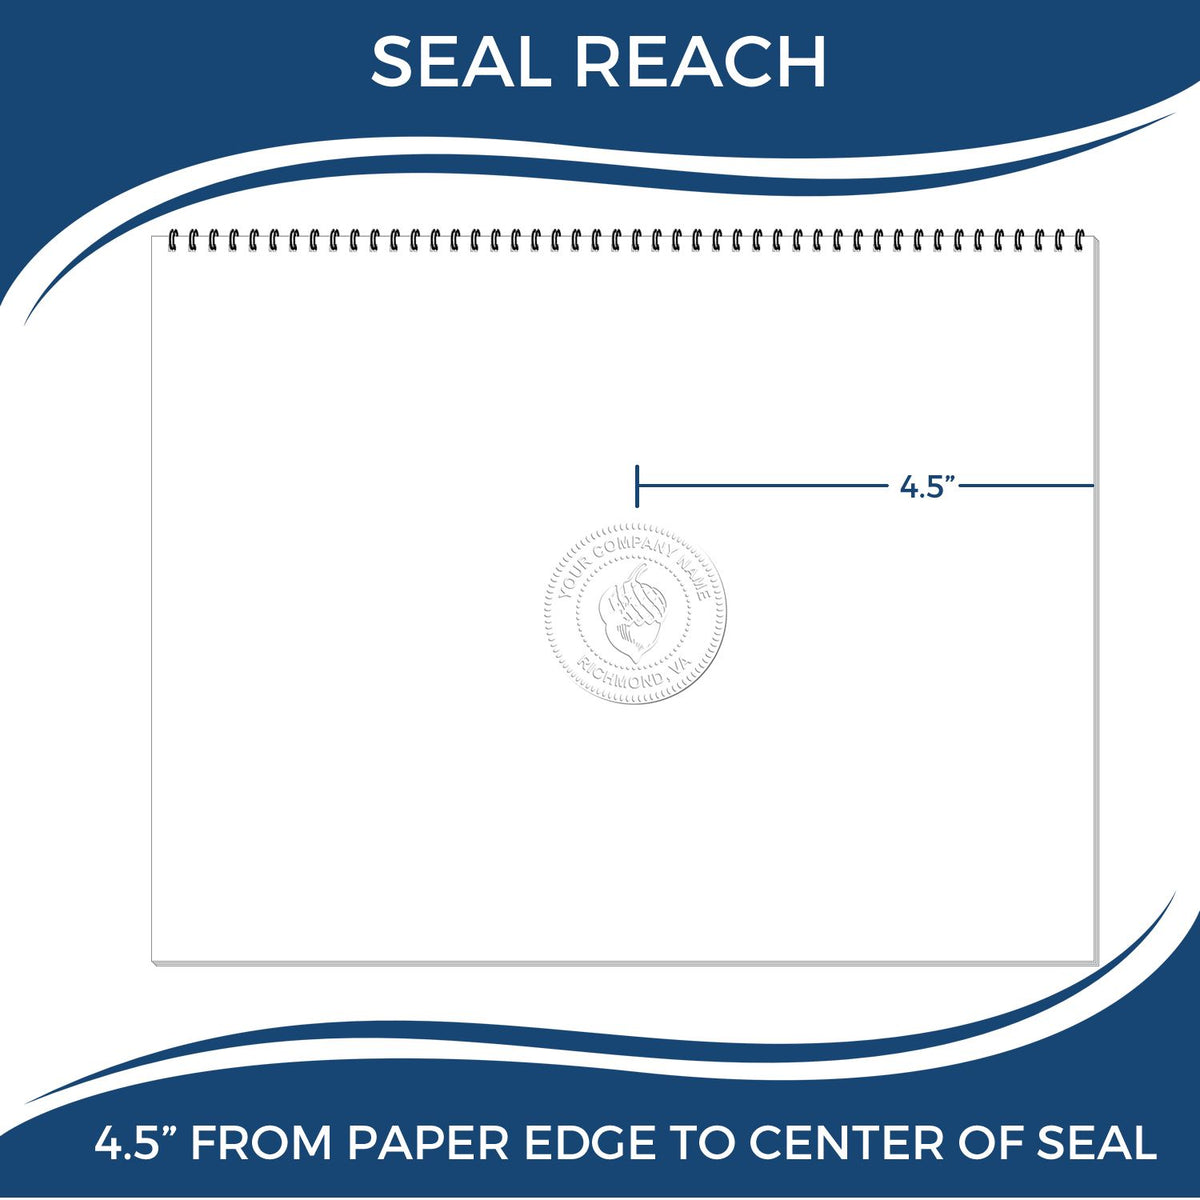 An infographic showing the seal reach which is represented by a ruler and a miniature seal image of the Extended Long Reach Kansas Architect Seal Embosser